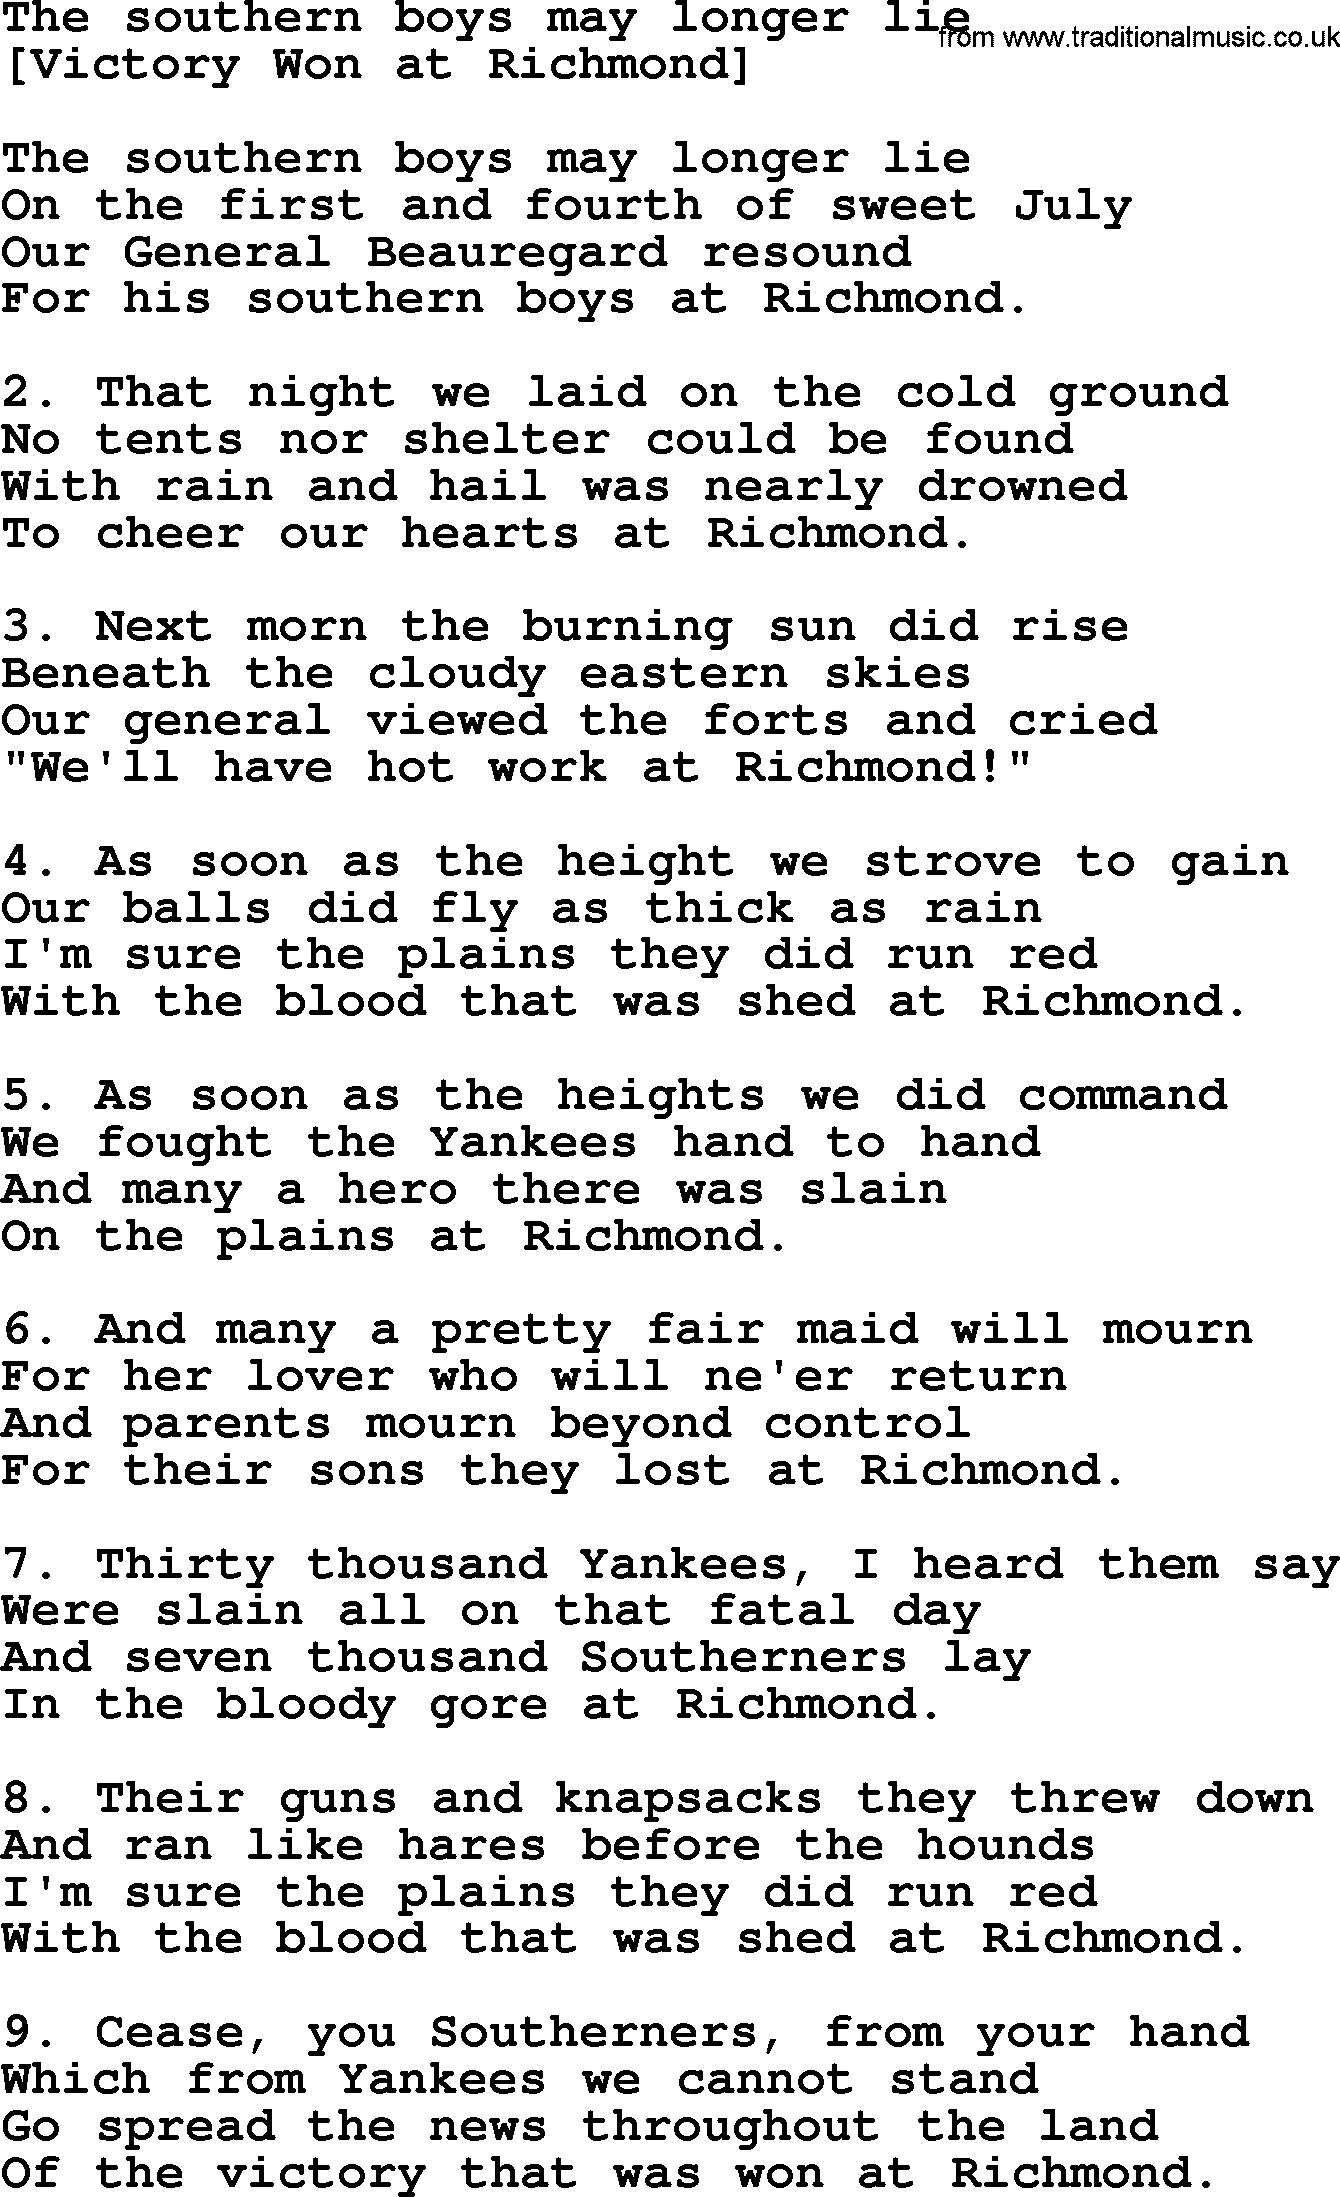 Old American Song: The Southern Boys May Longer Lie, lyrics